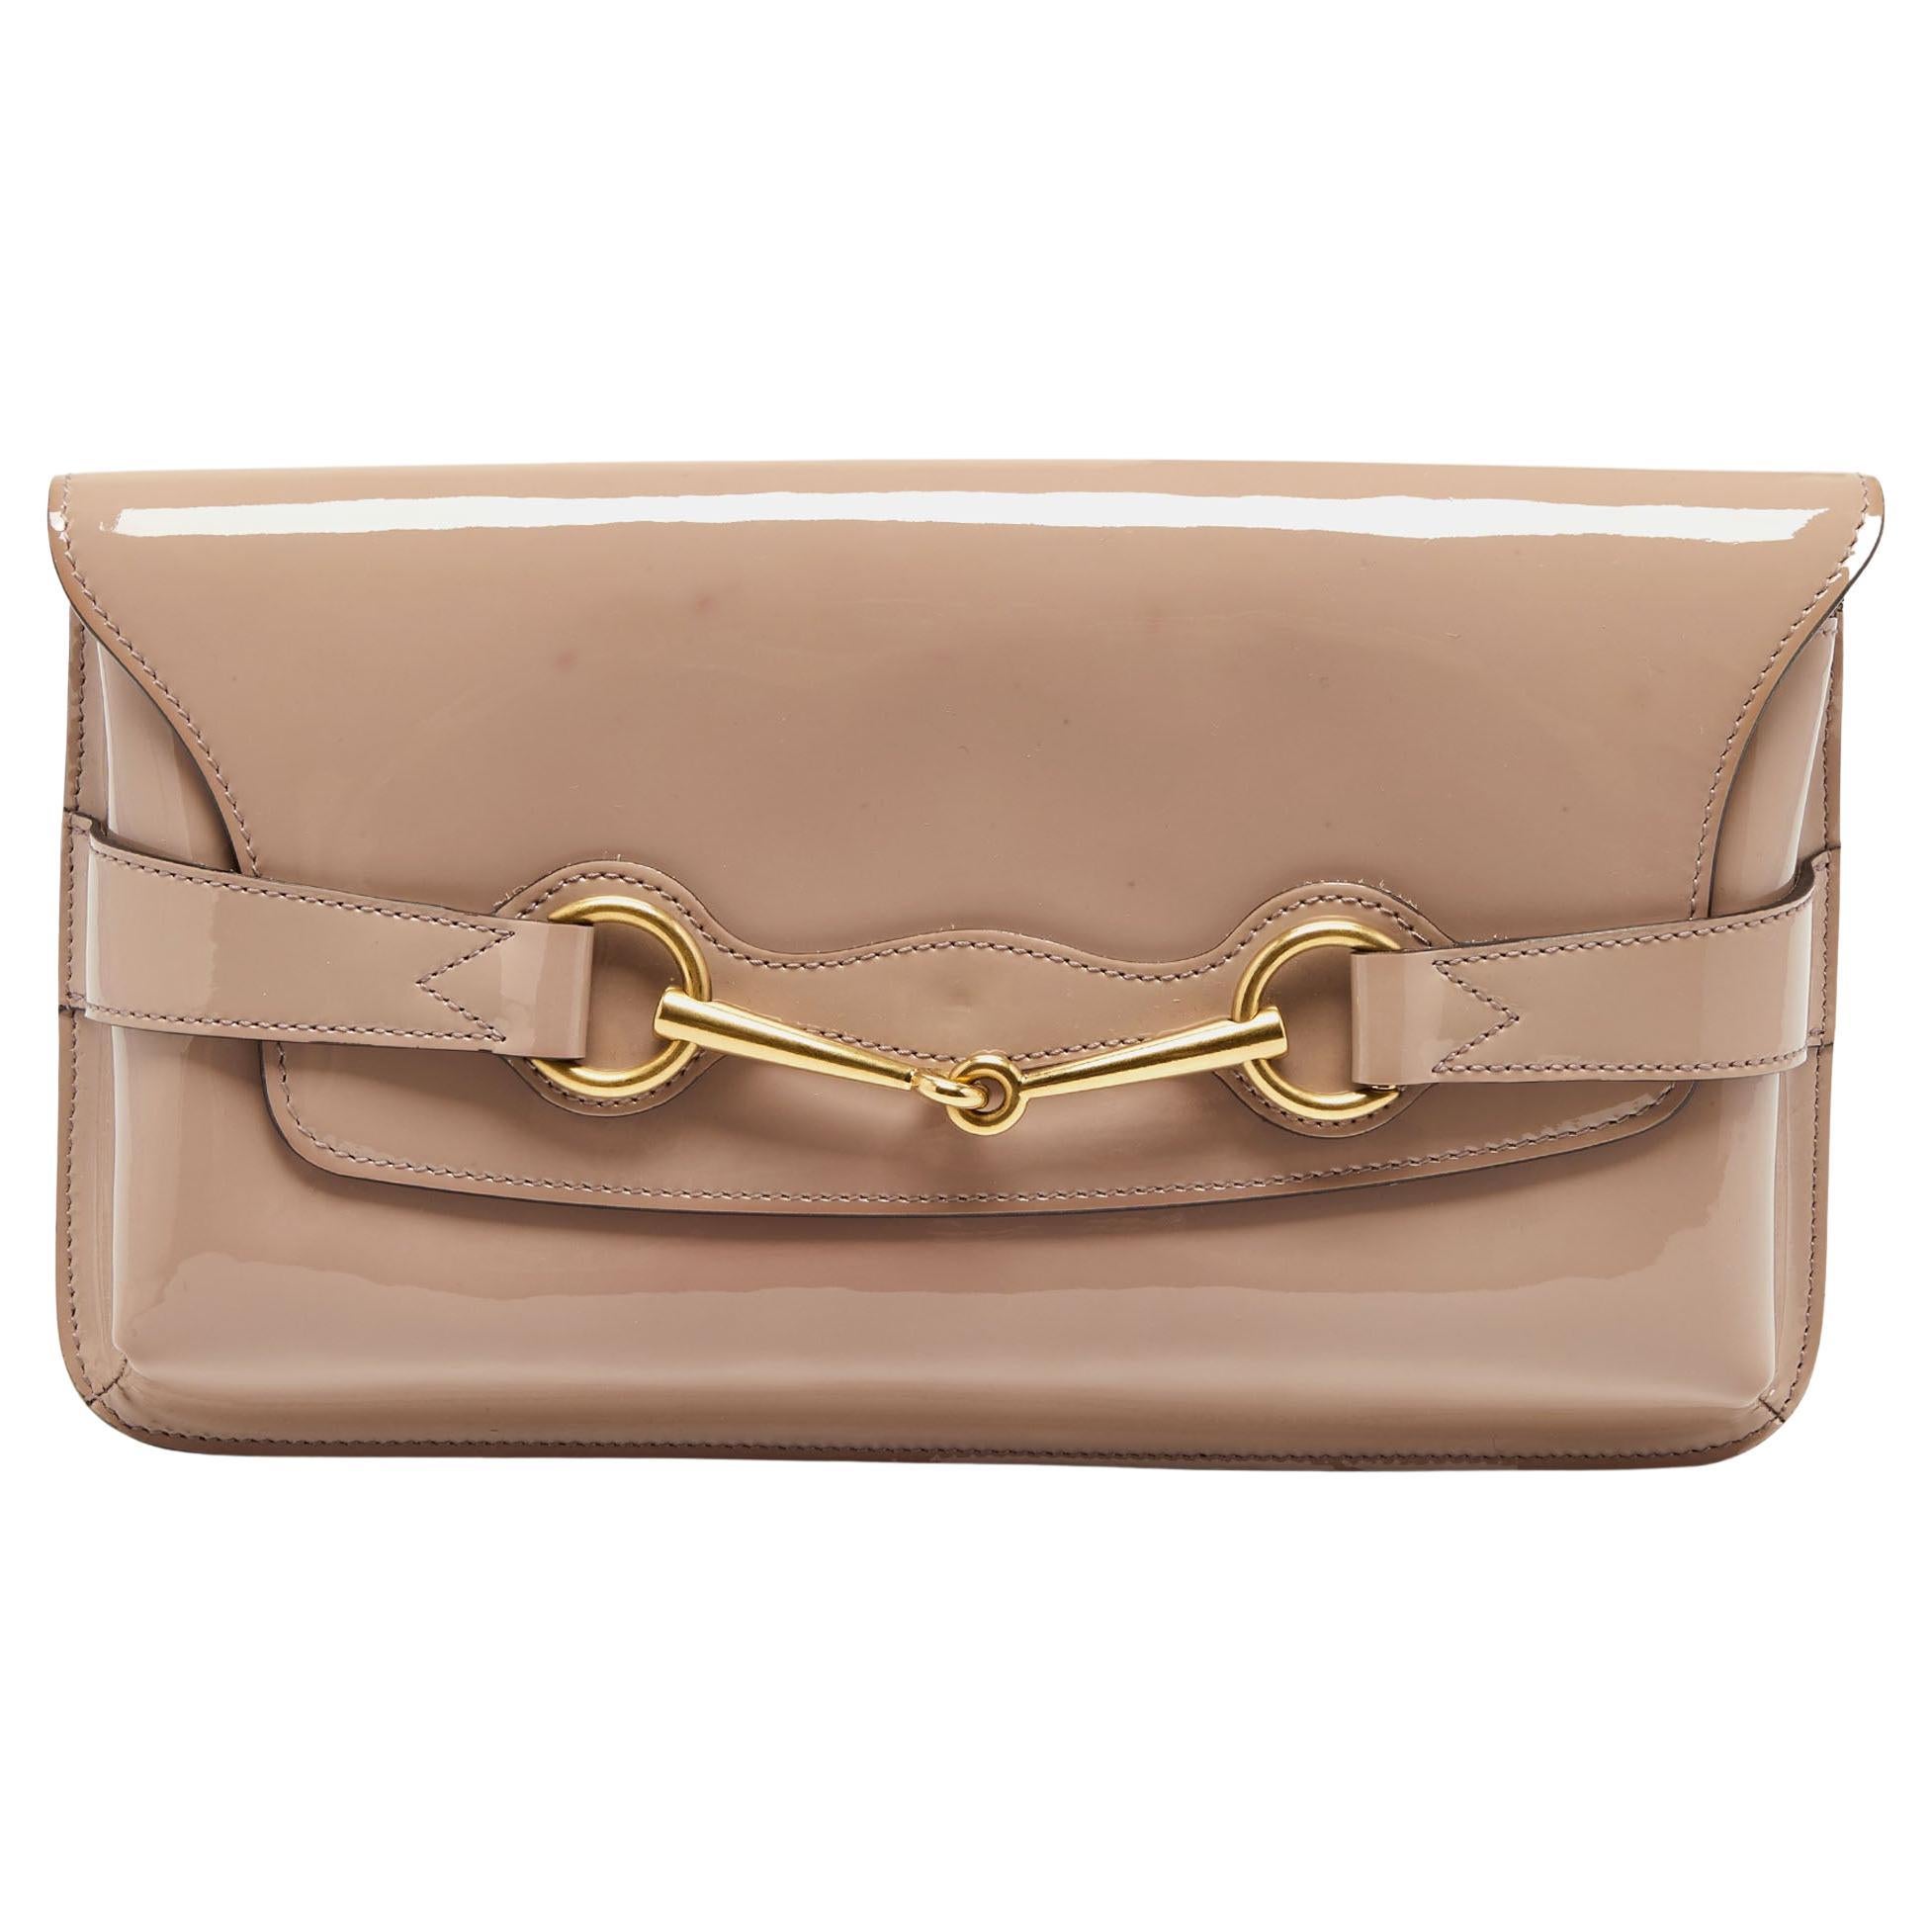 Neem een ​​bad Dat Luchtvaart Gucci Beige Patent Leather Bright Bit Clutch For Sale at 1stDibs